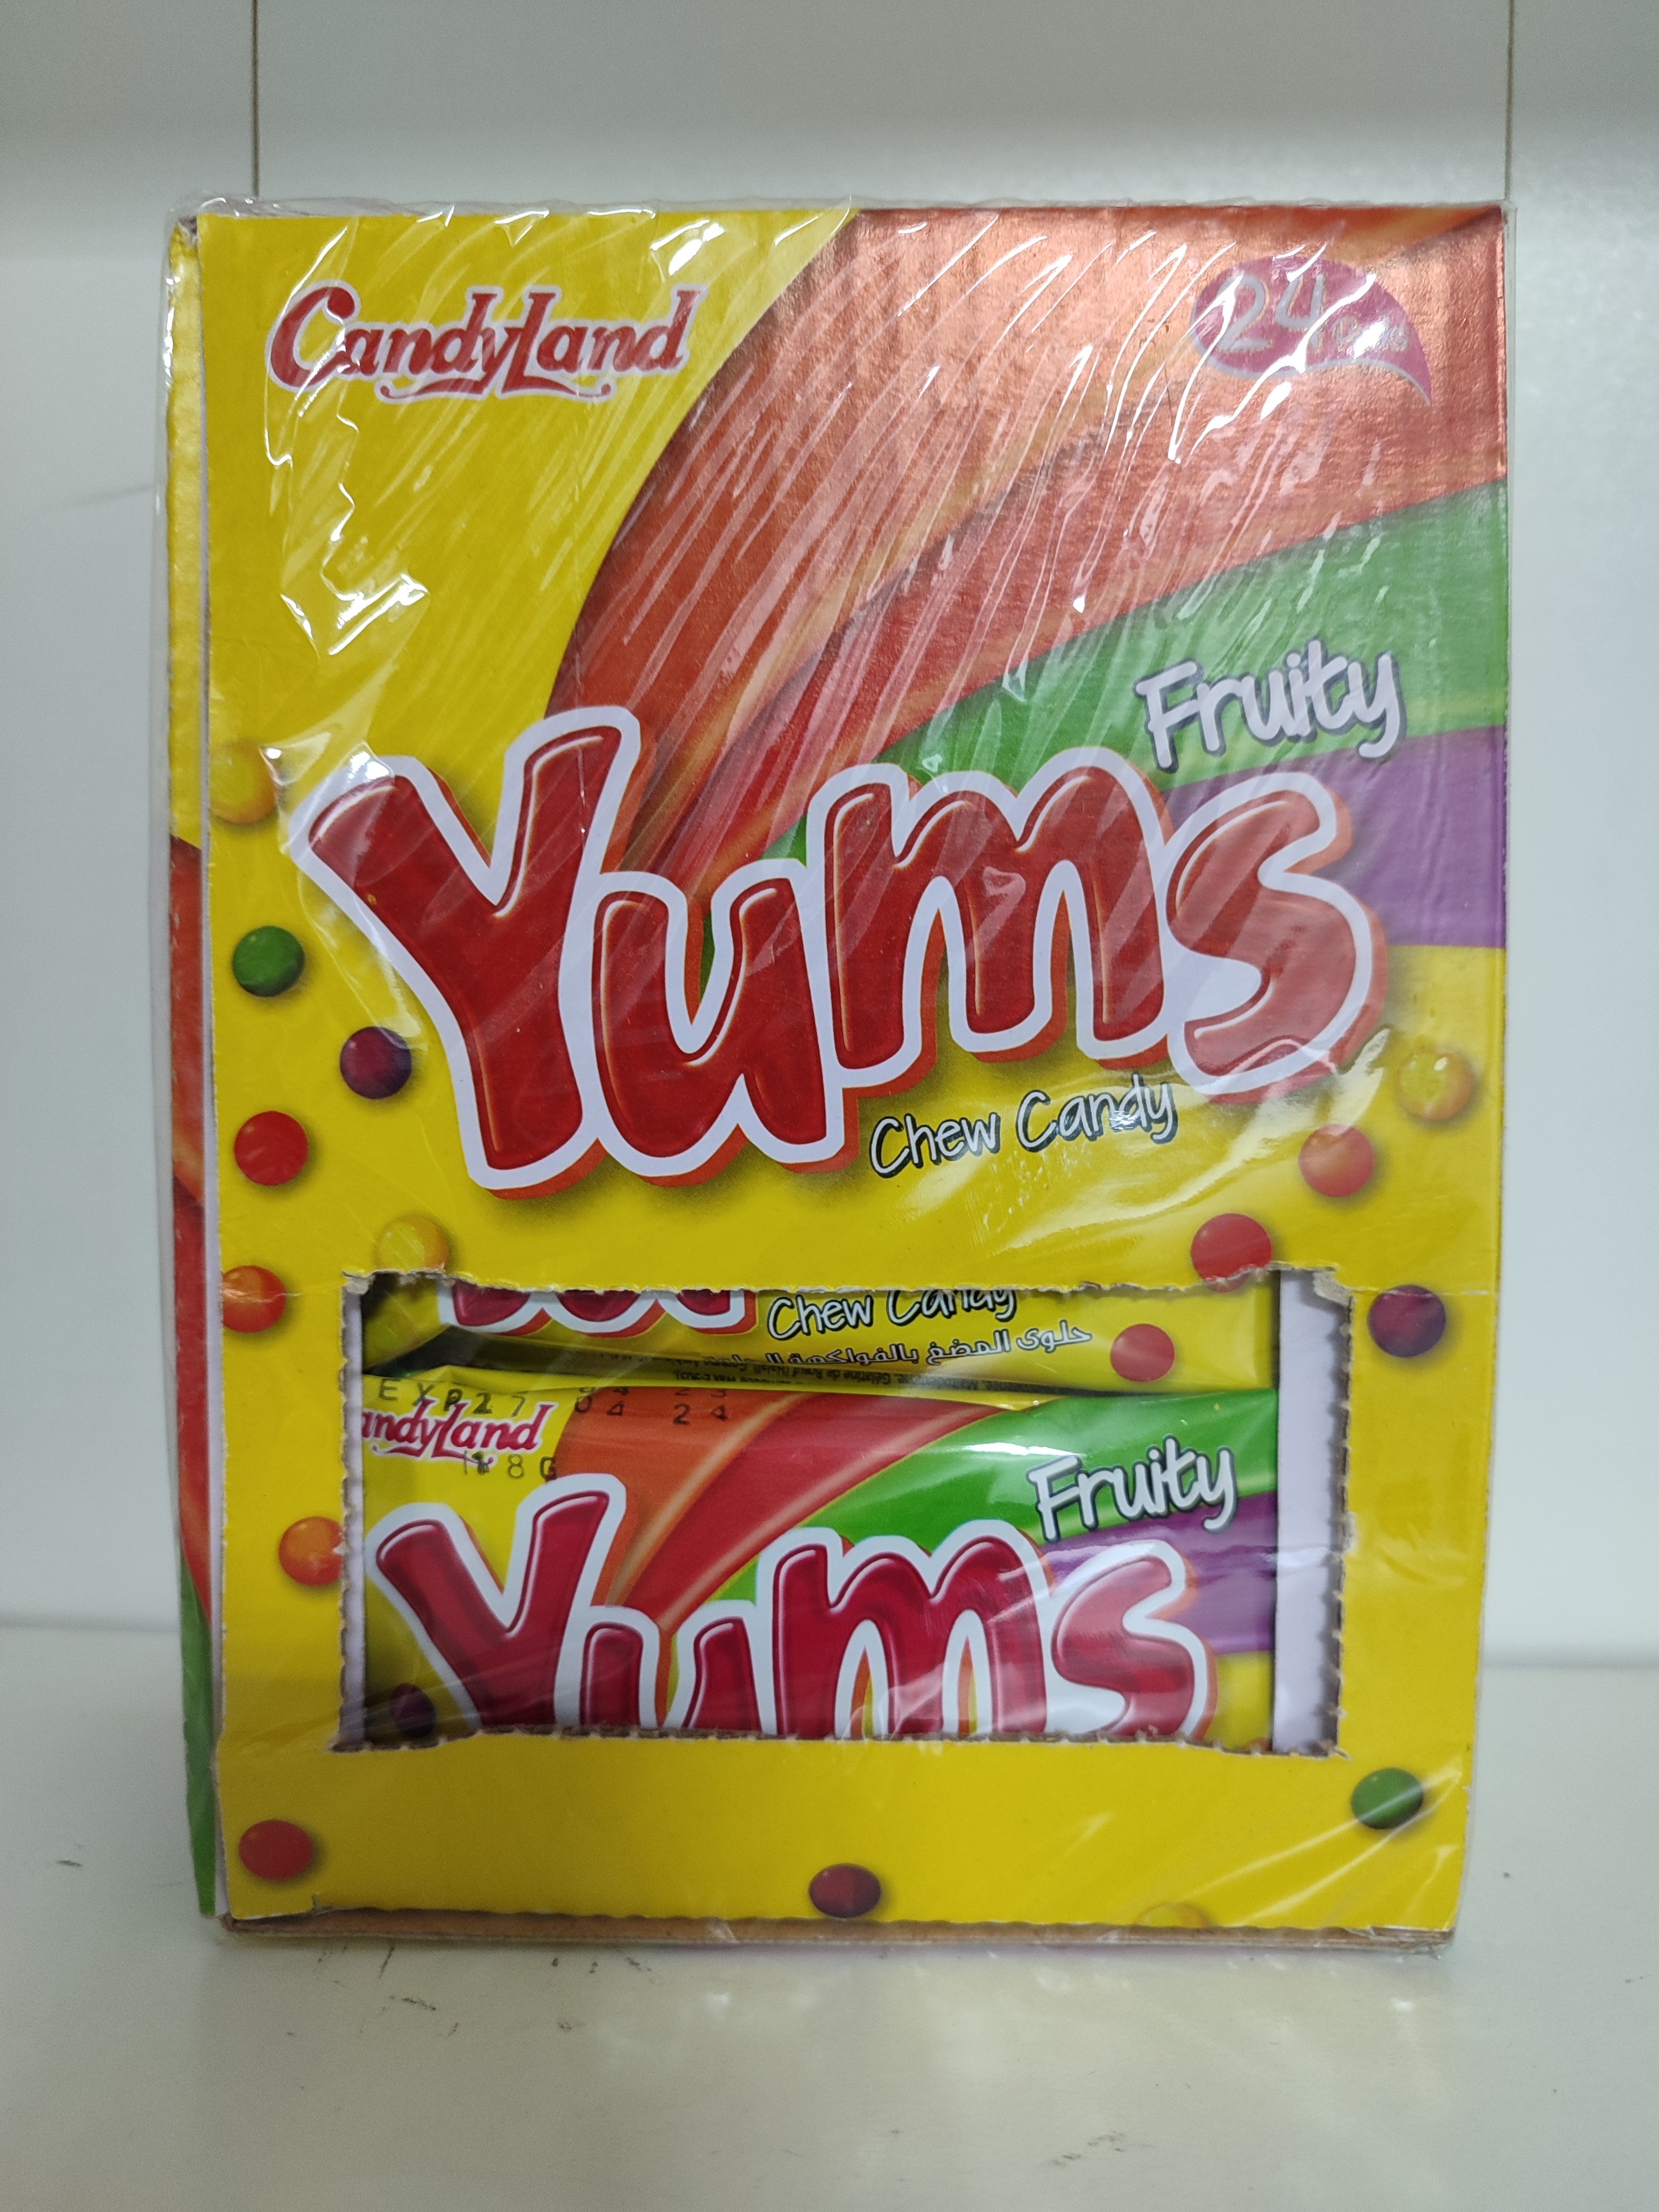 (Food) Fruity Yums Chew Candy (1X24)